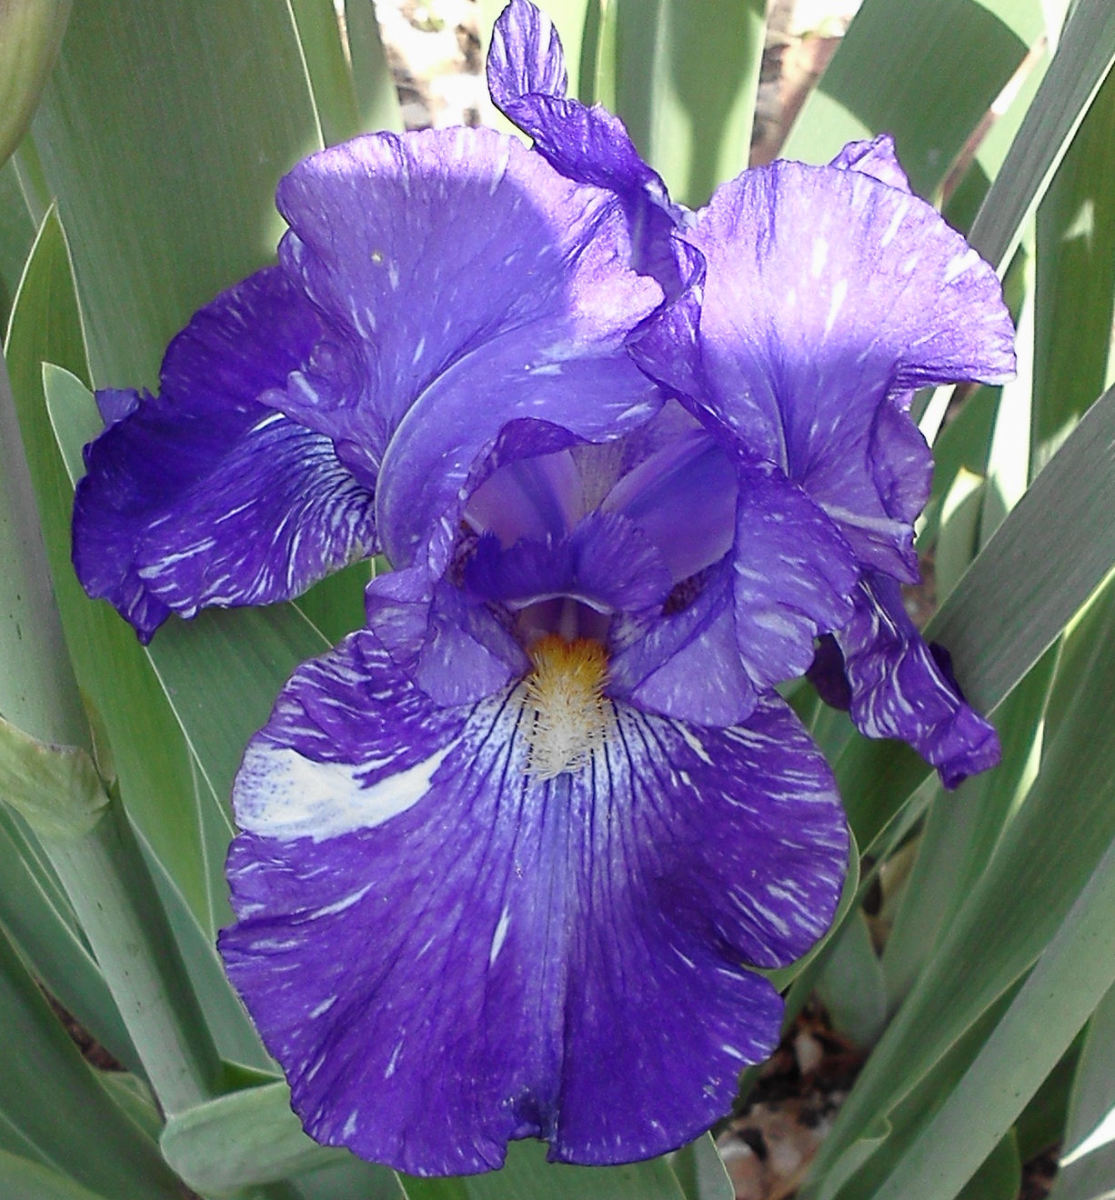 How to Raise and Divide Irises